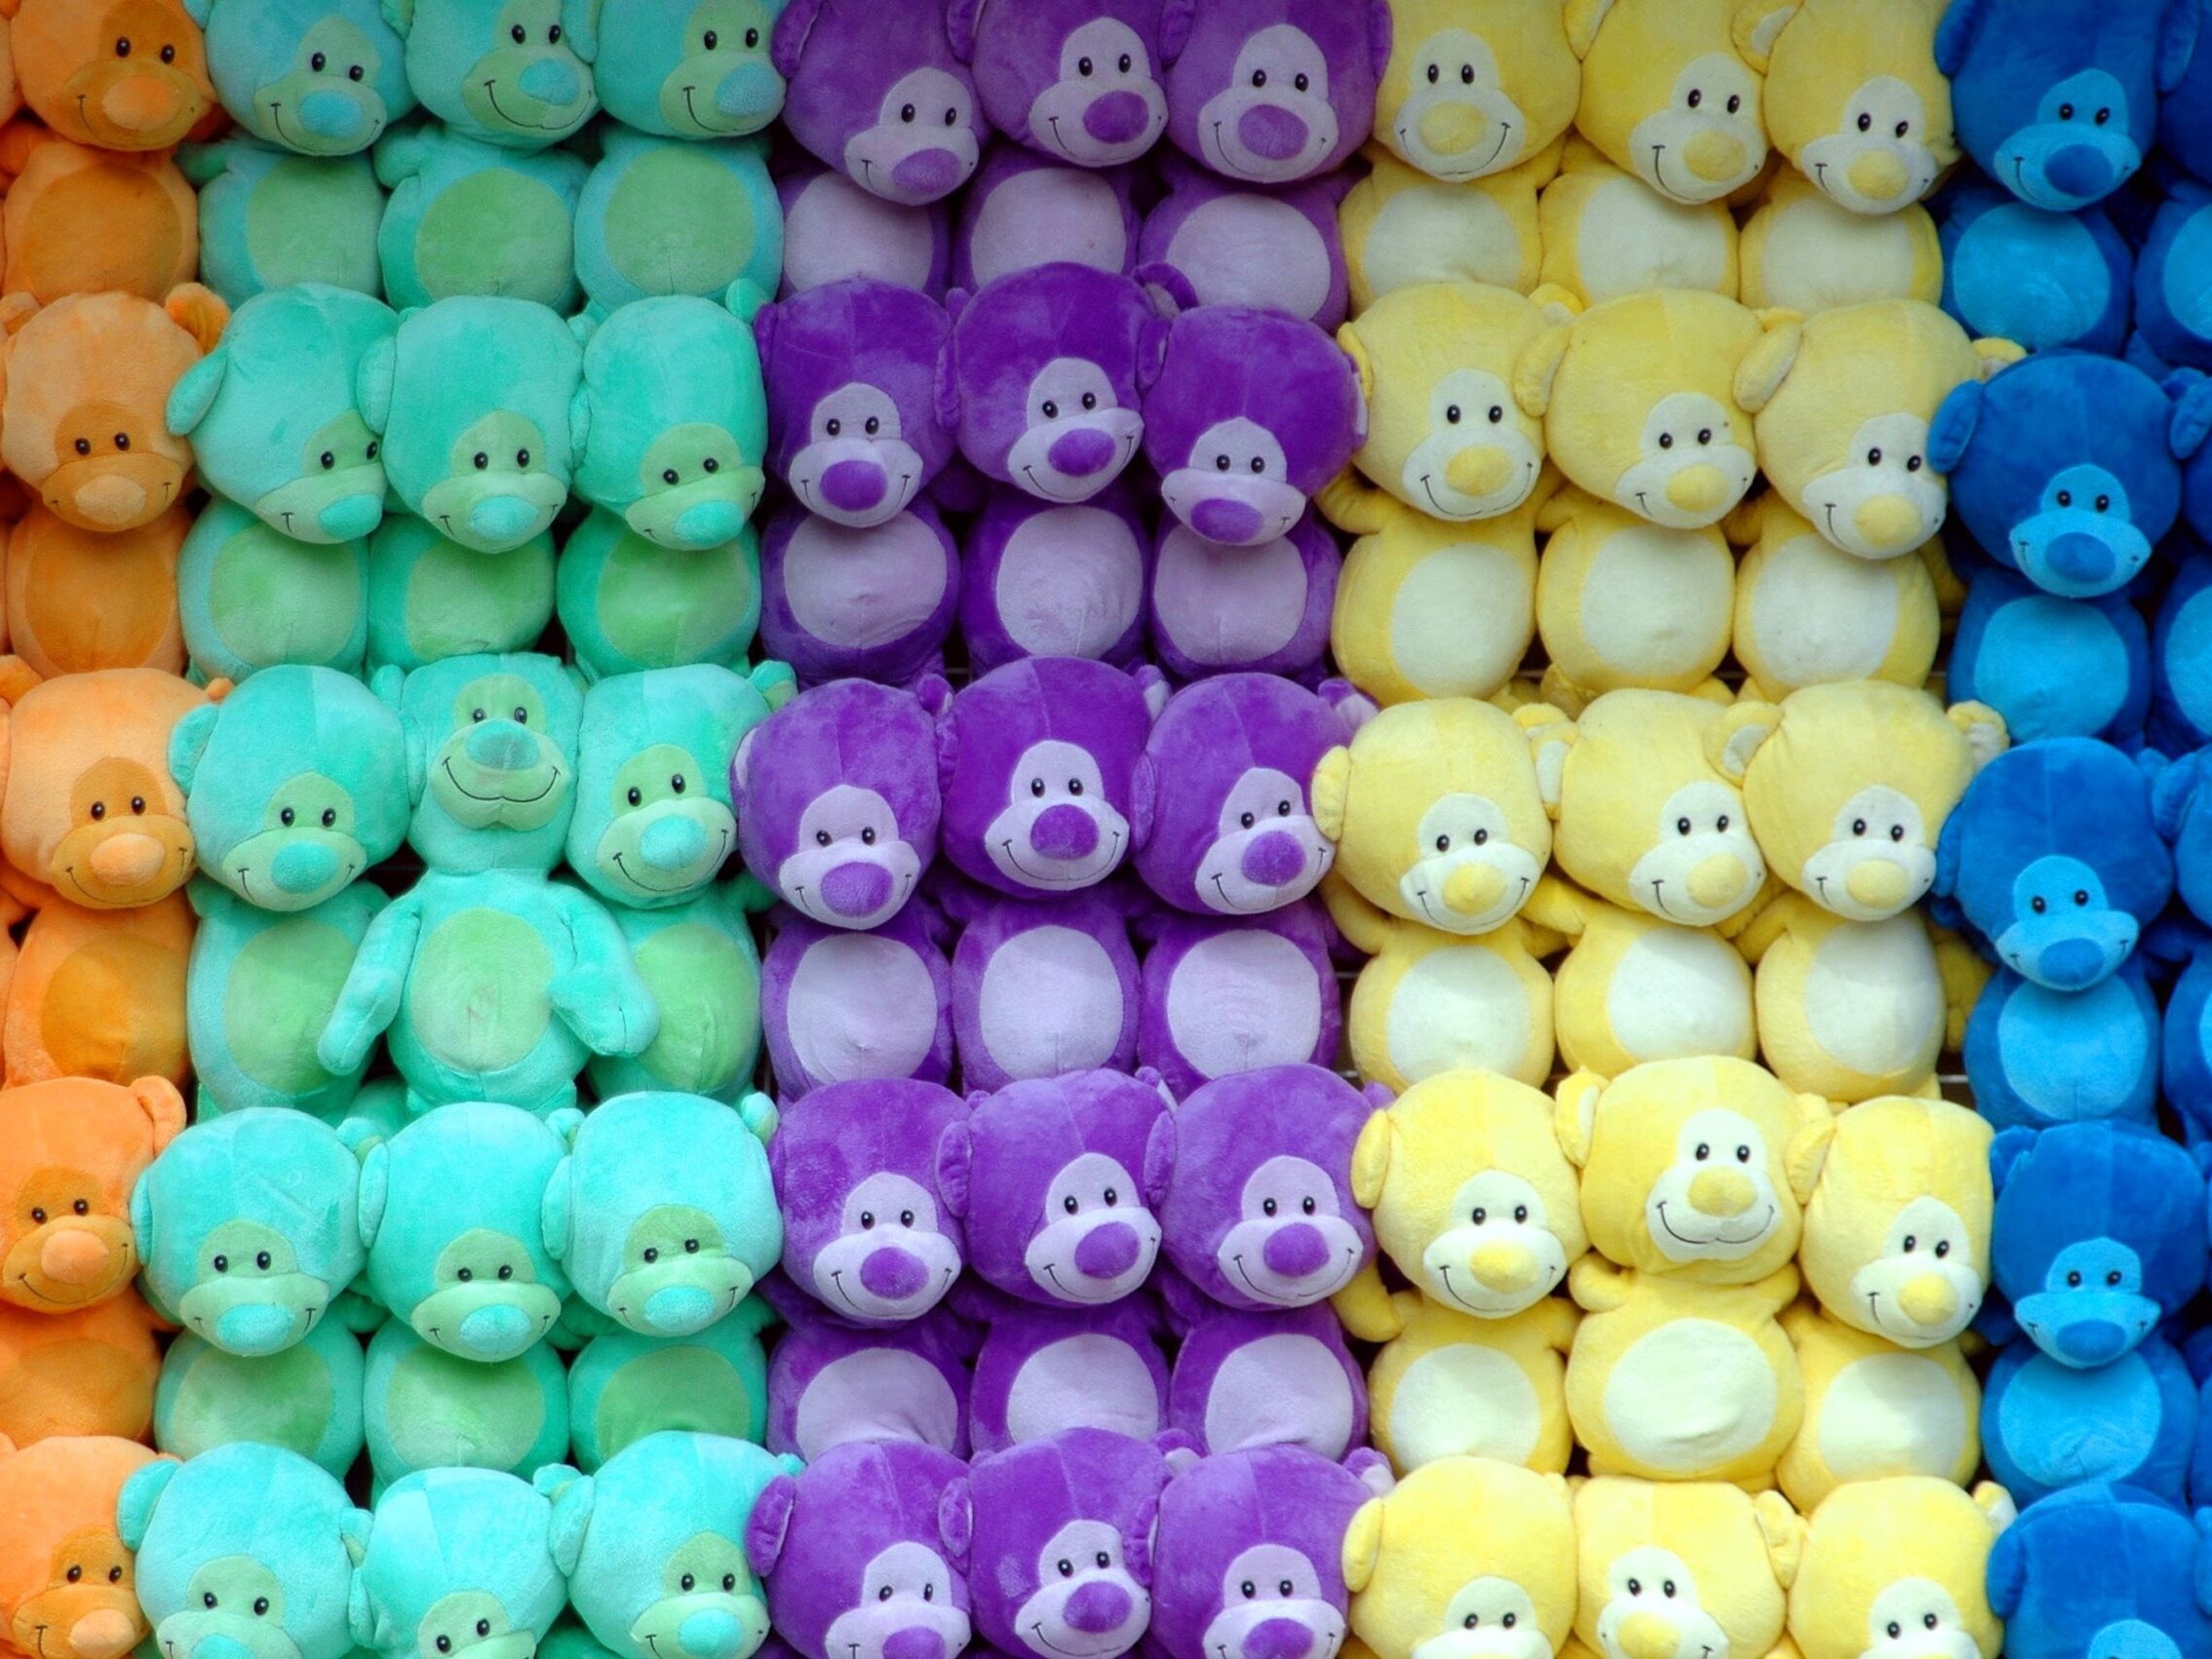 A wall of different colored plush bears.